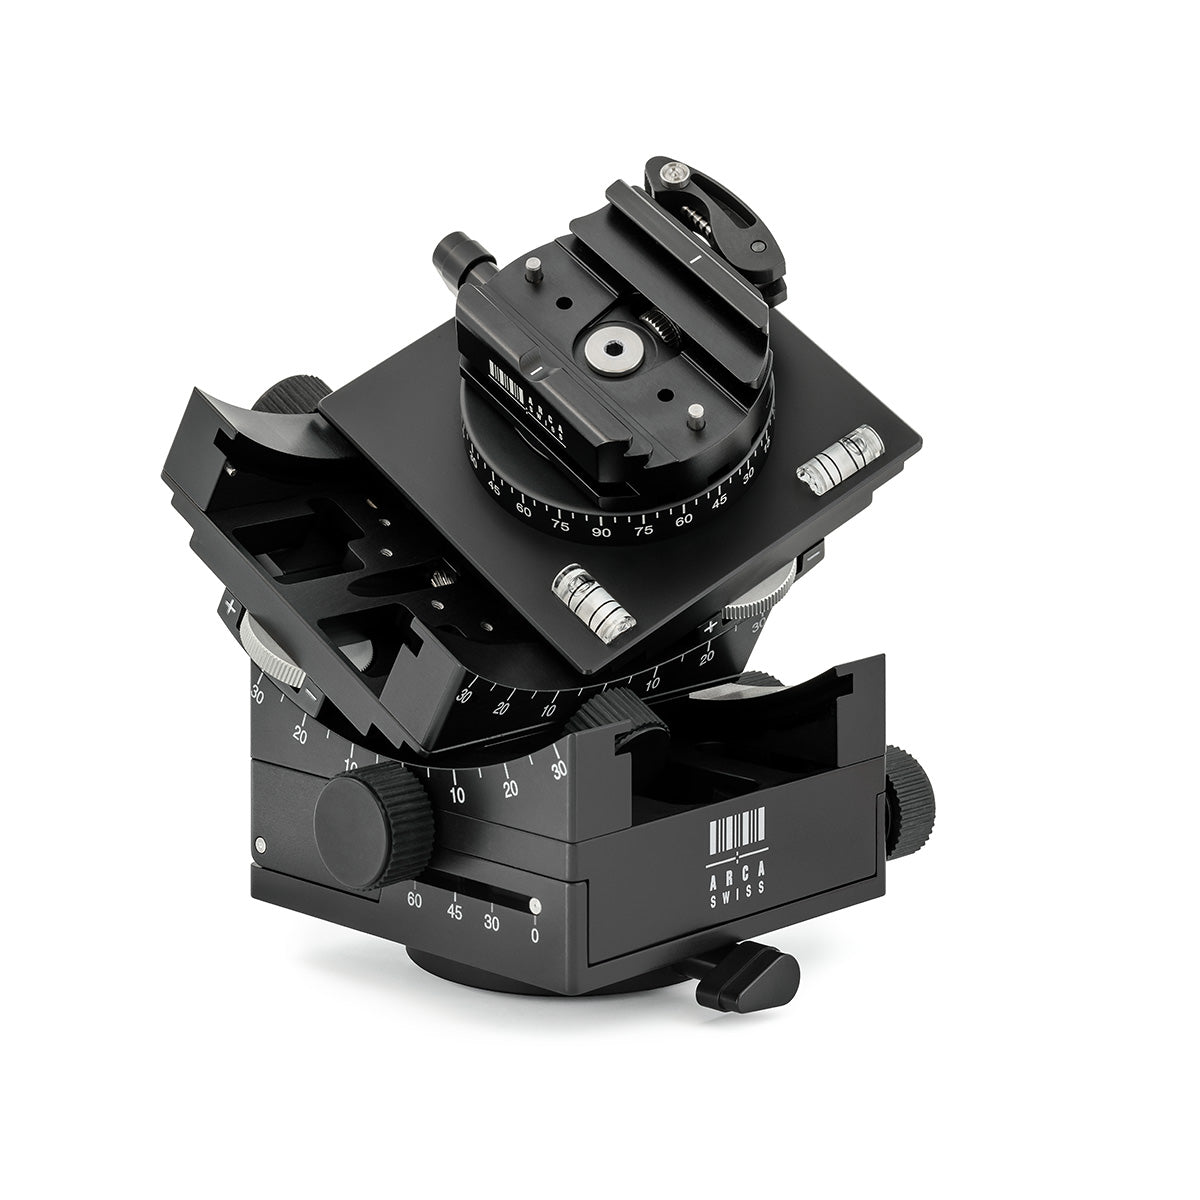 Arca-Swiss C1 Cube geared tripod head with flipLock quick release, 3/4 front view showing 30 degrees of tilt in each axis, model 8501000.1 from Arca-Swiss USA.